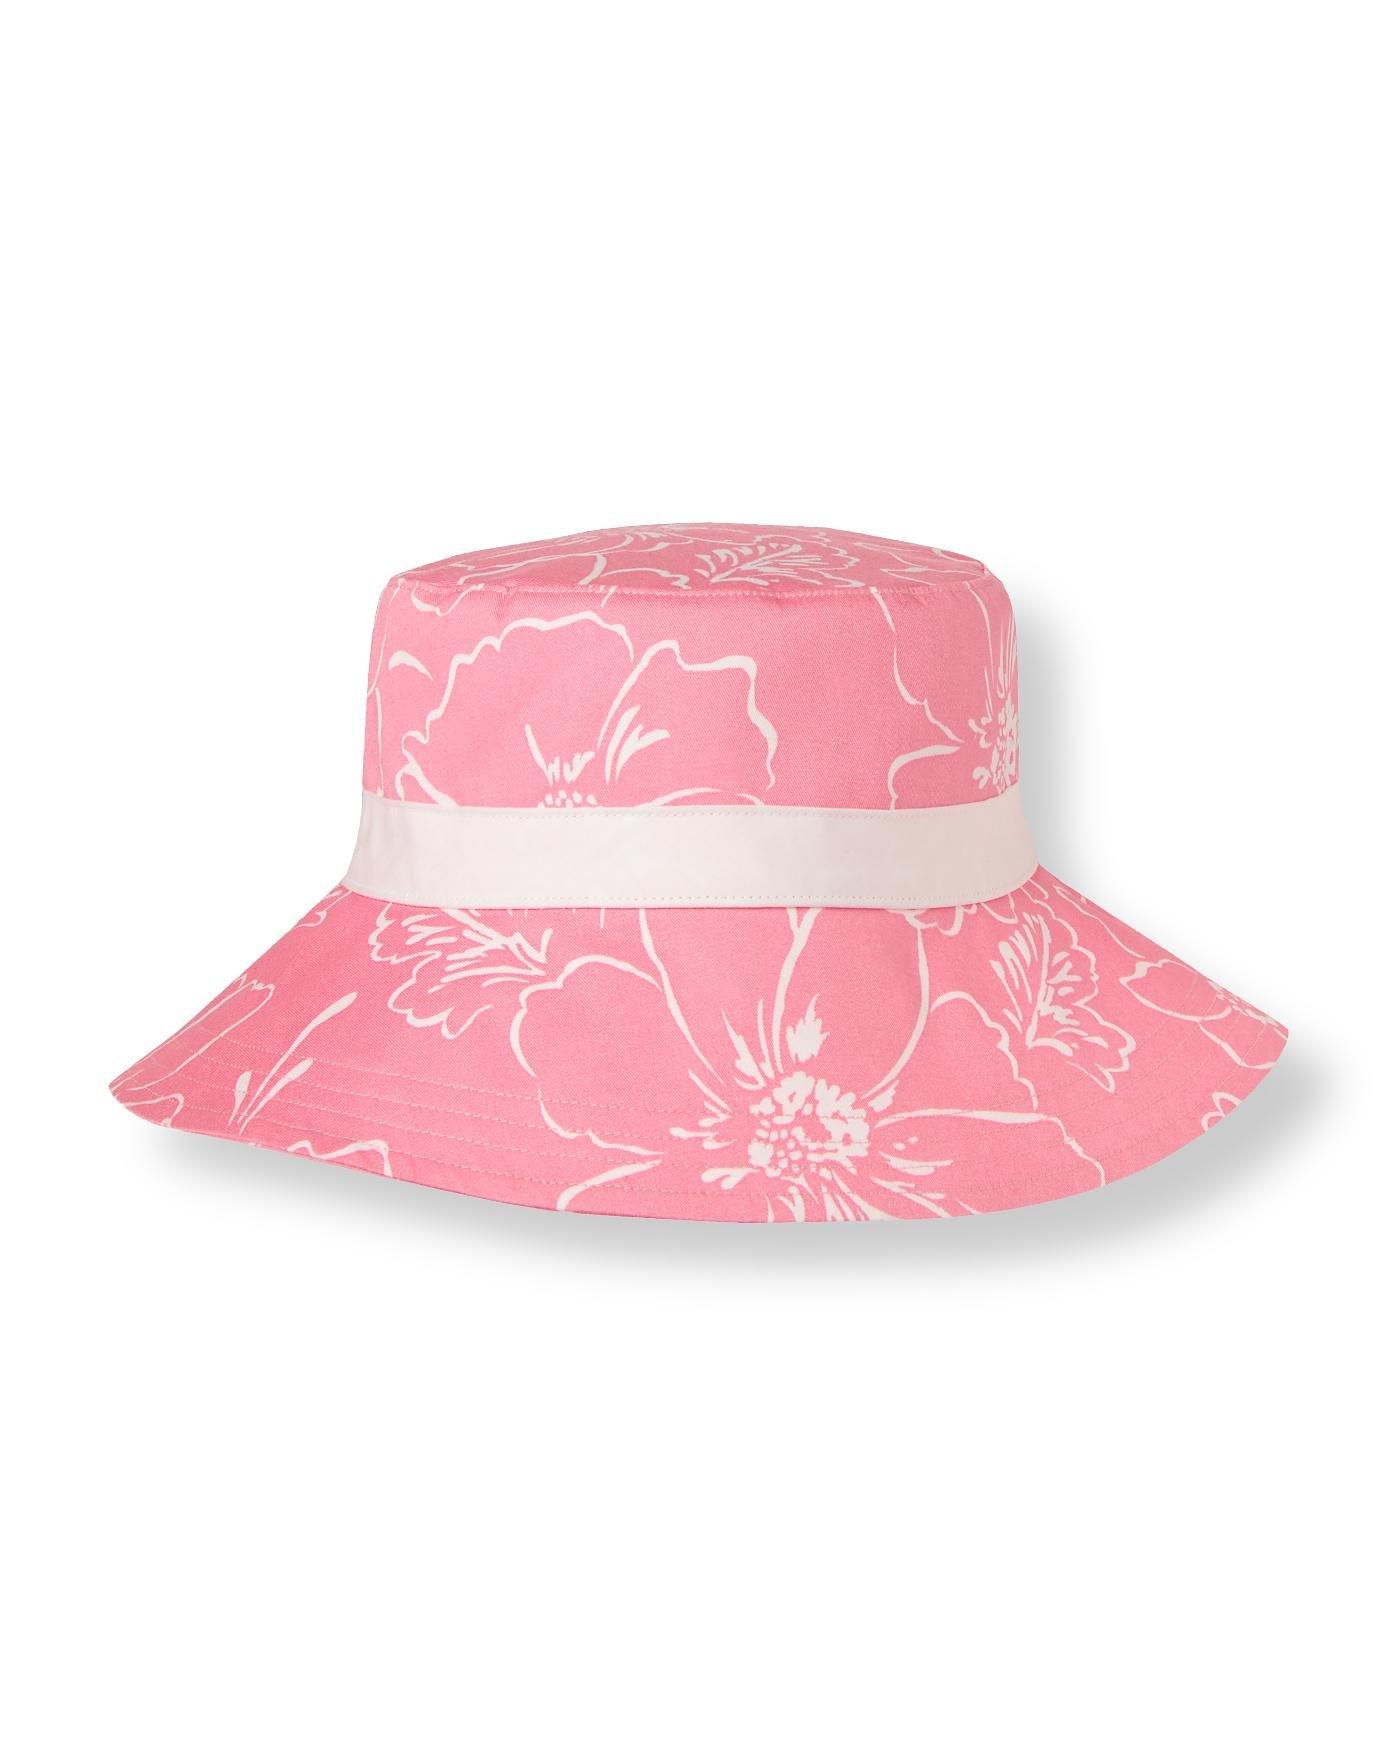 Bow Floral Sunhat image number 0